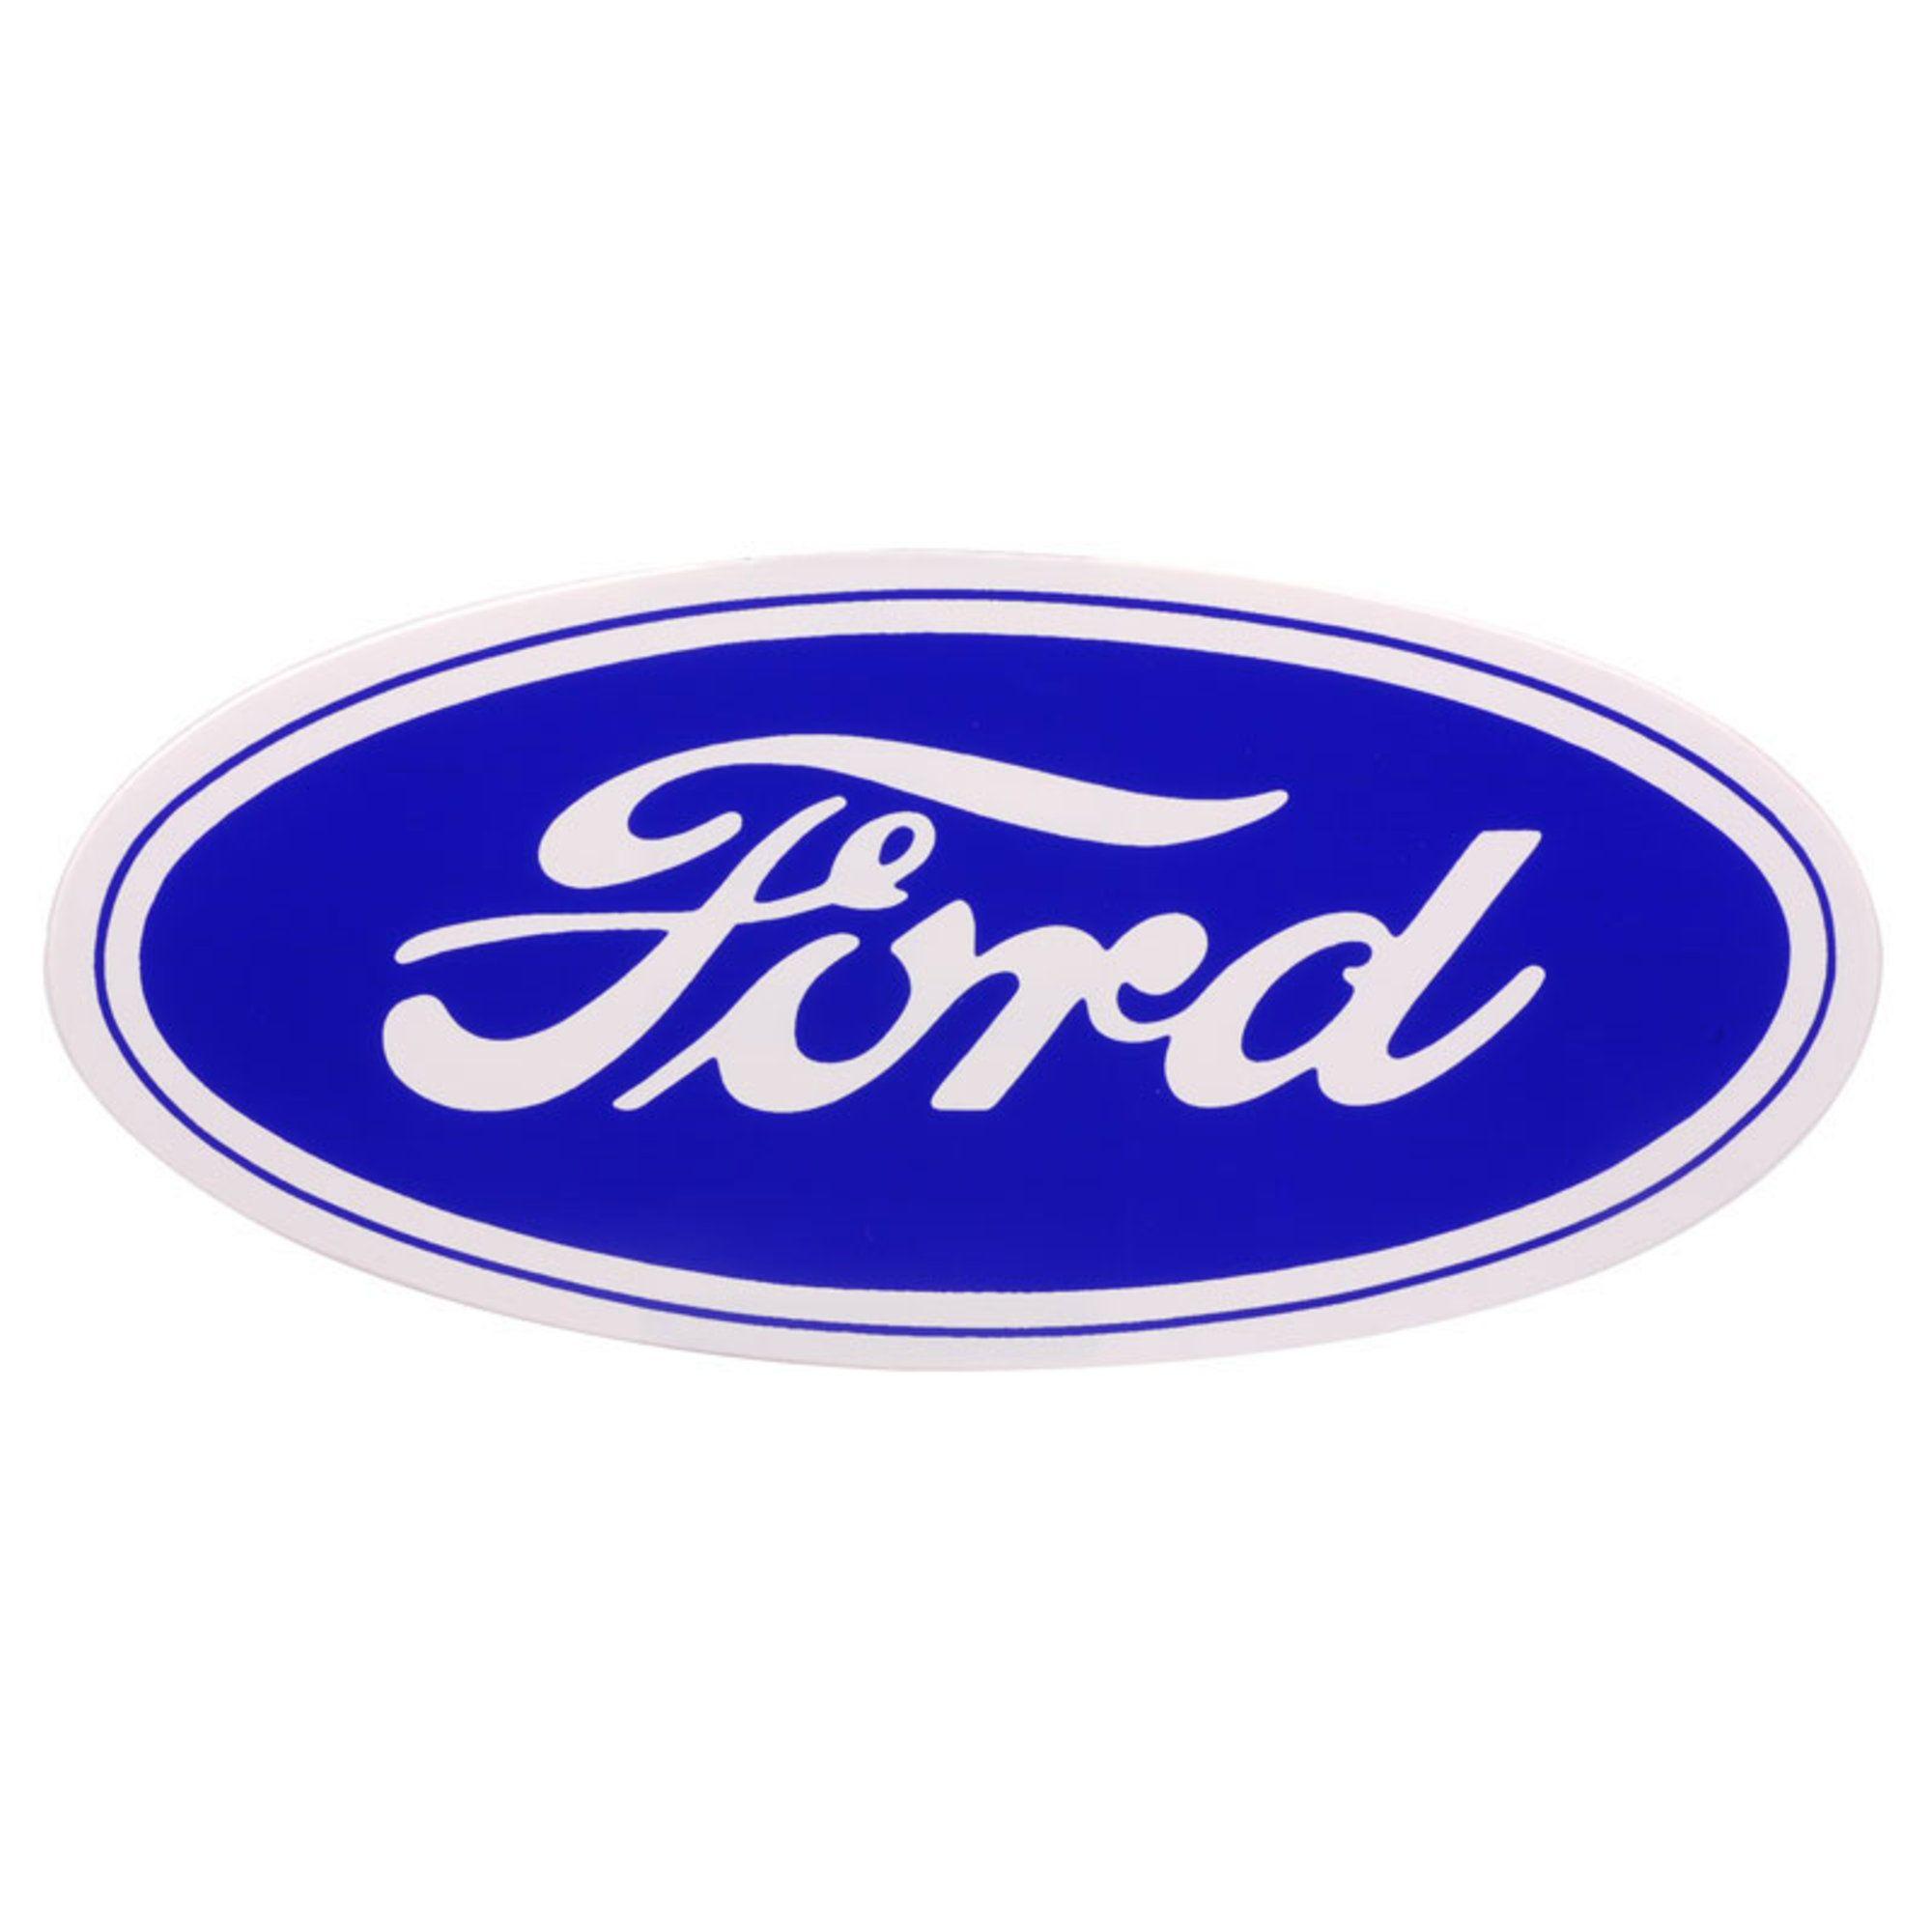 White and Blue Oval Logo - 12 Ford Script Sticker on White Background. Dennis